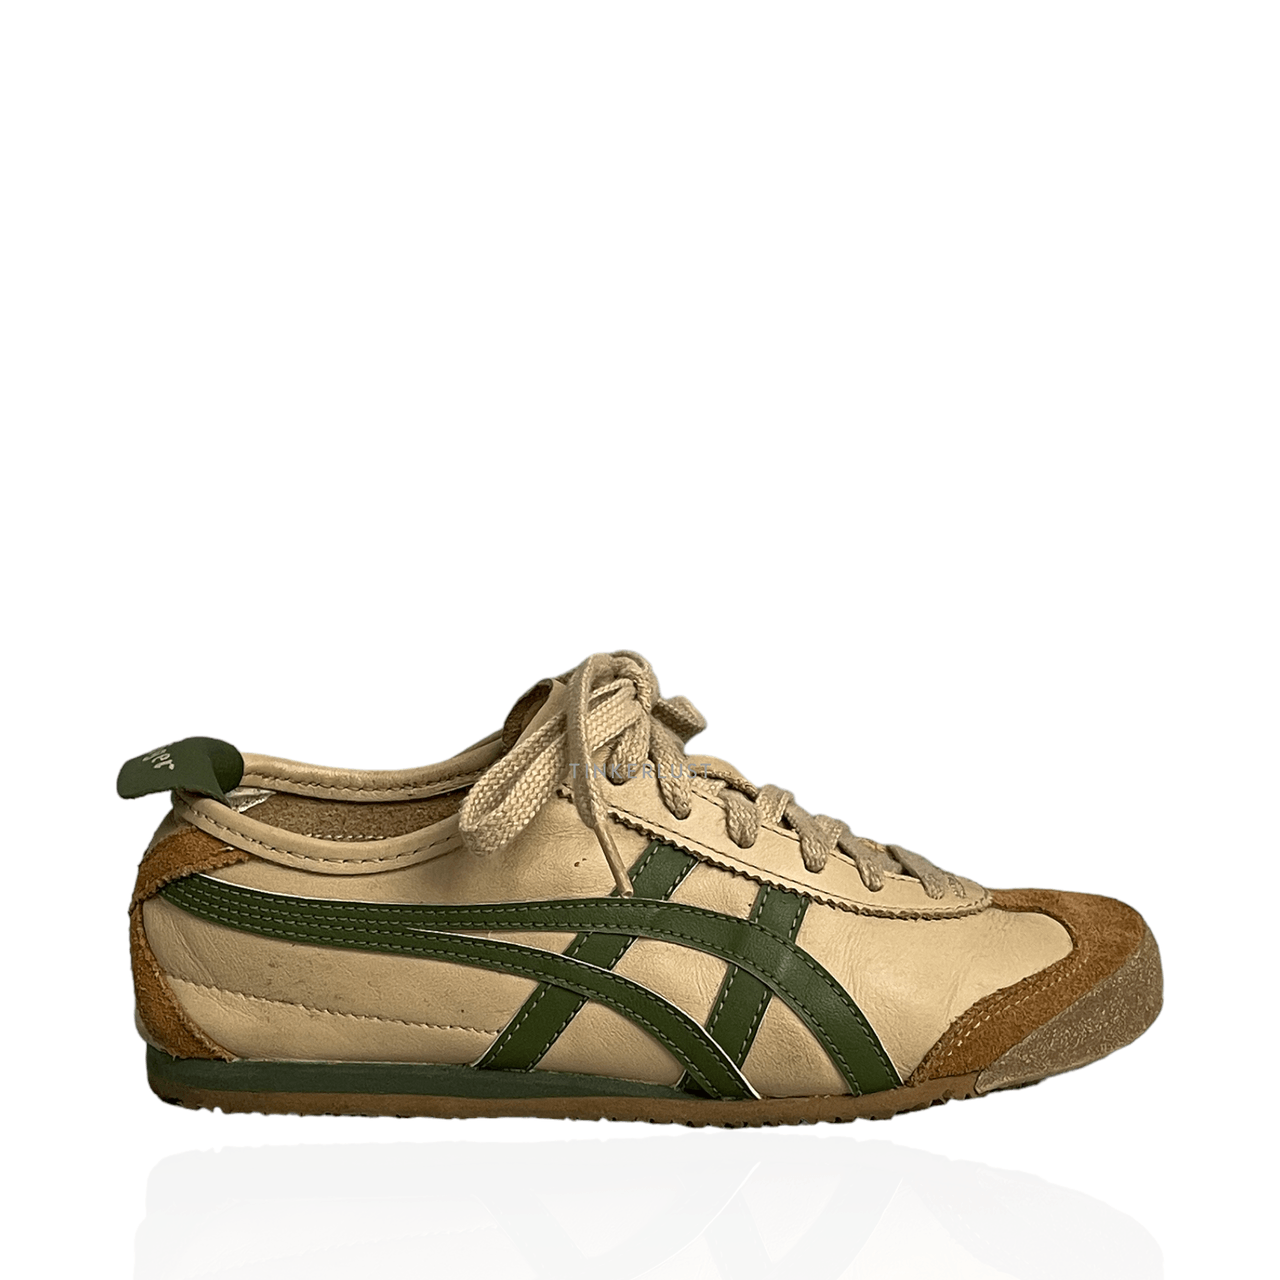 Onitsuka Tiger Mexico 66 - Beige/Grass Green Sneakers